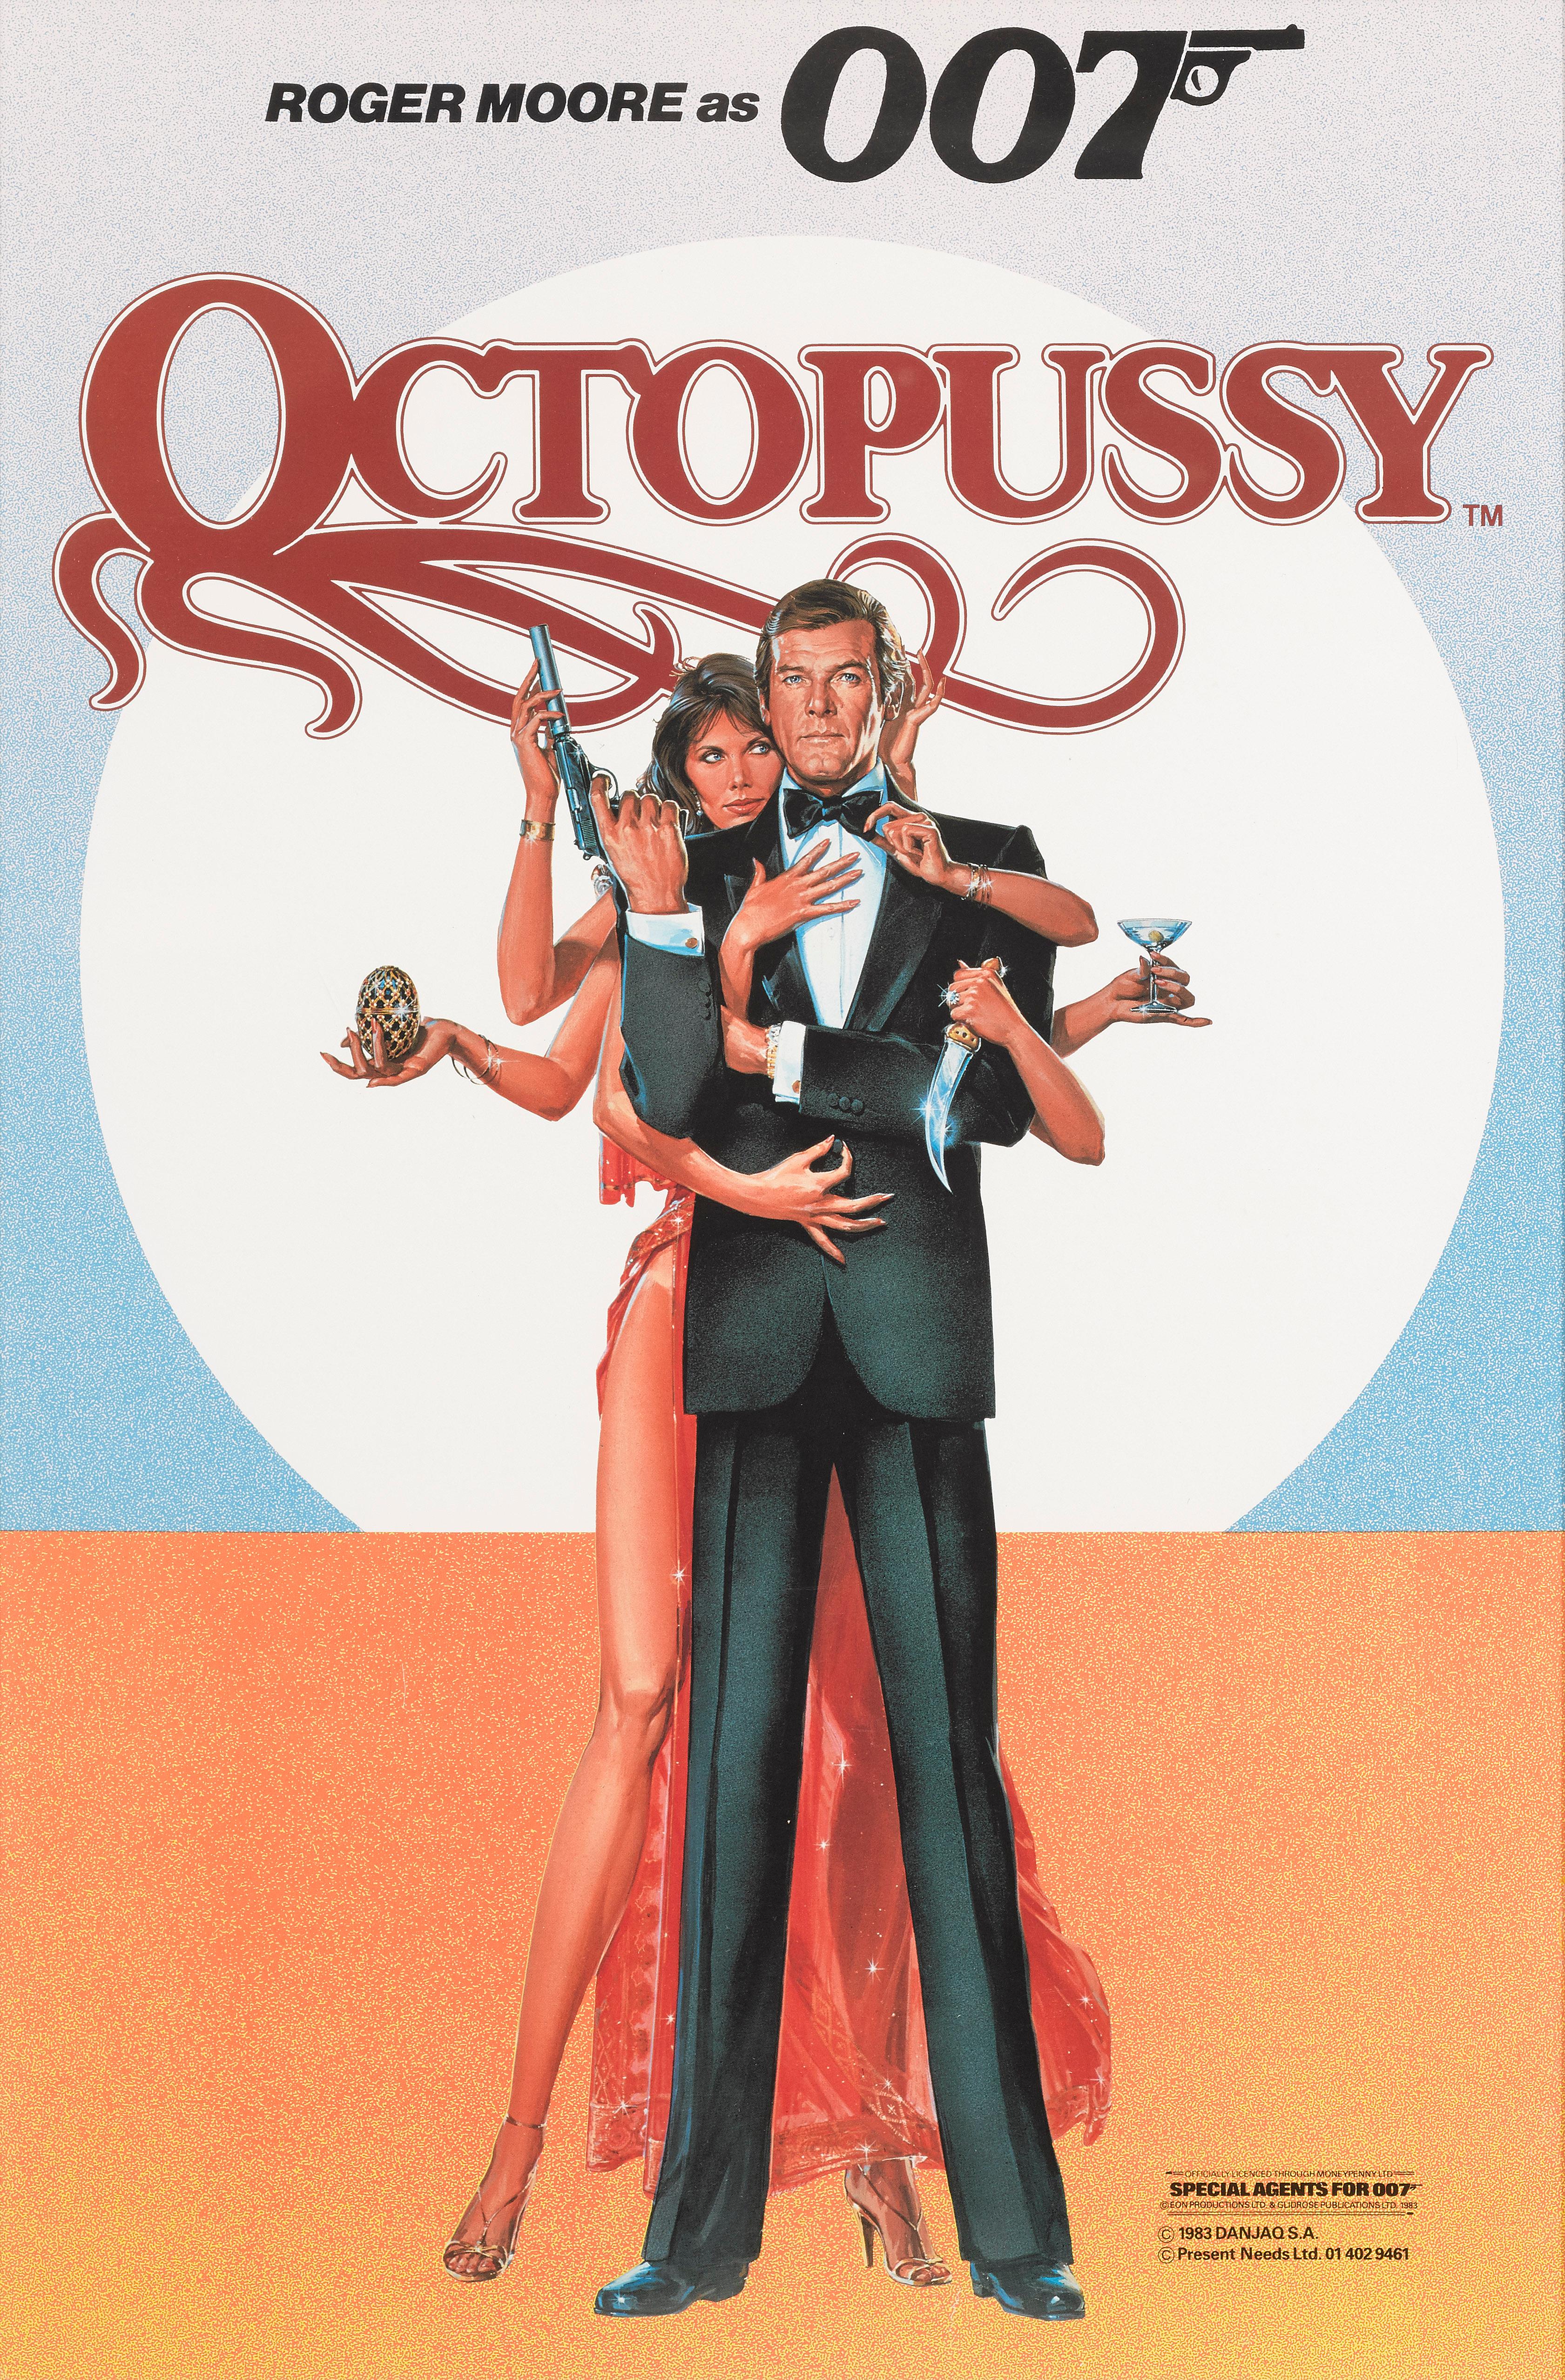 Original British special advance film poster for the (1983) James Bond film Octopussy.
This is the thirteenth film in the James Bond series produced by Eon Productions, and the sixth to star Roger Moore as James Bond. It was directed by John Glen,